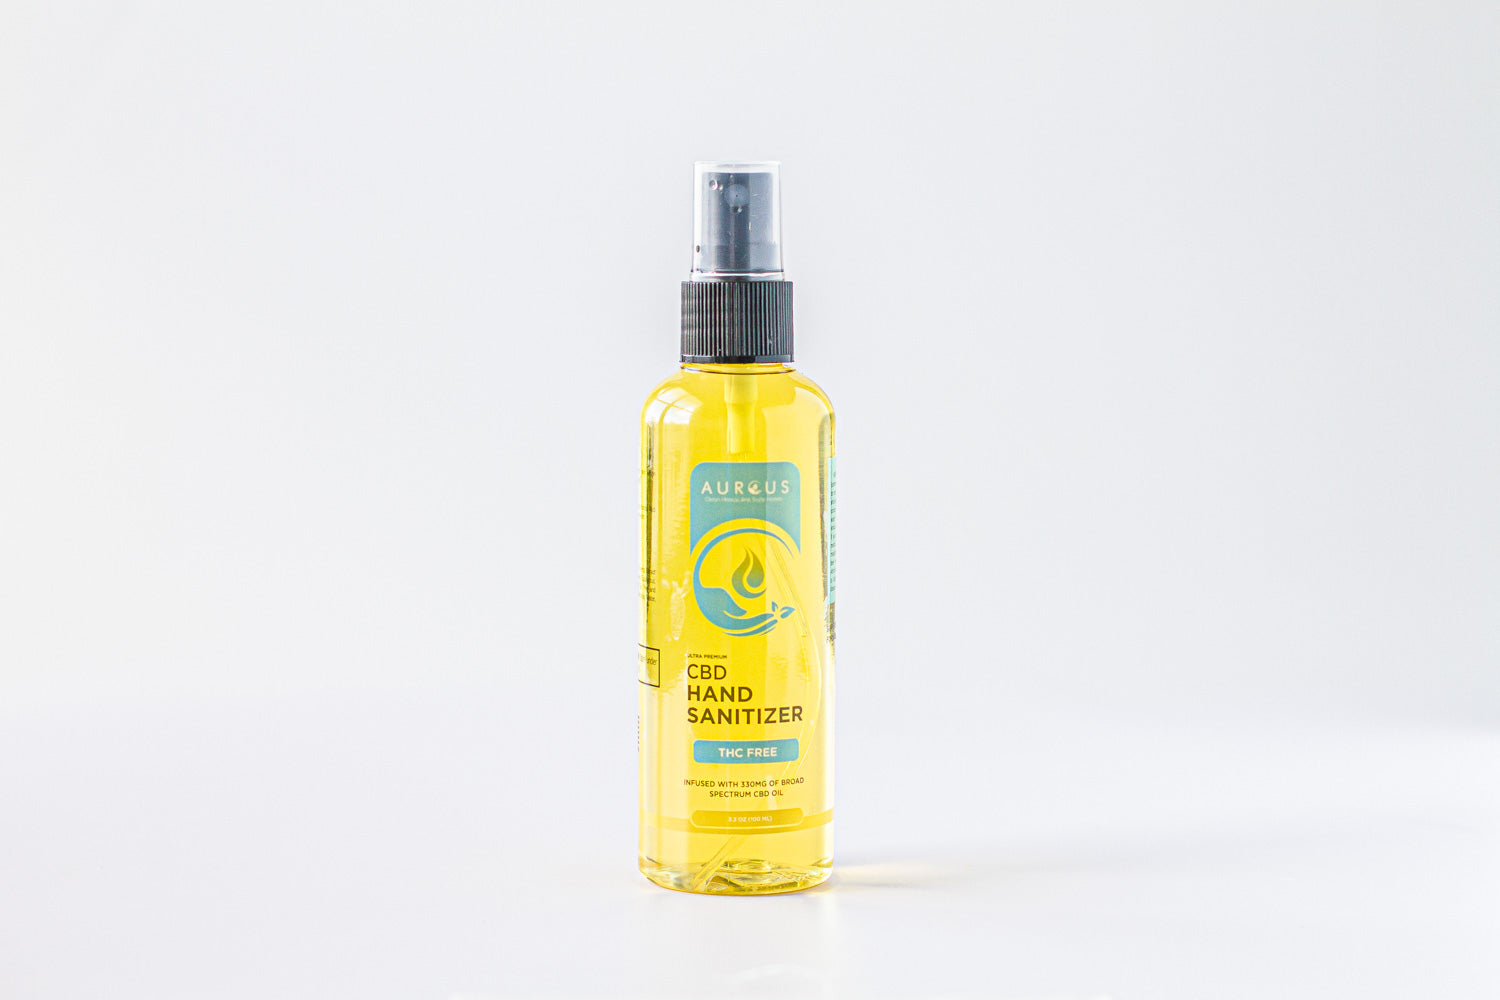 Look no further the “Gold Standard” in hand sanitizer is finally here. The formulation is FDA-approved, eliminates 99% of harmful bacteria, and leaves your hands smelling great too. Our premium sanitizer spray infuses the fast-absorbing, hand-soothing benefits of CBD and is THC-free.  Aurous Labs CBD hand sanitizer is naturally hydrating, germ-fighting, cruelty-free helps you have the confidence you need to effectively protect yourself and your family.